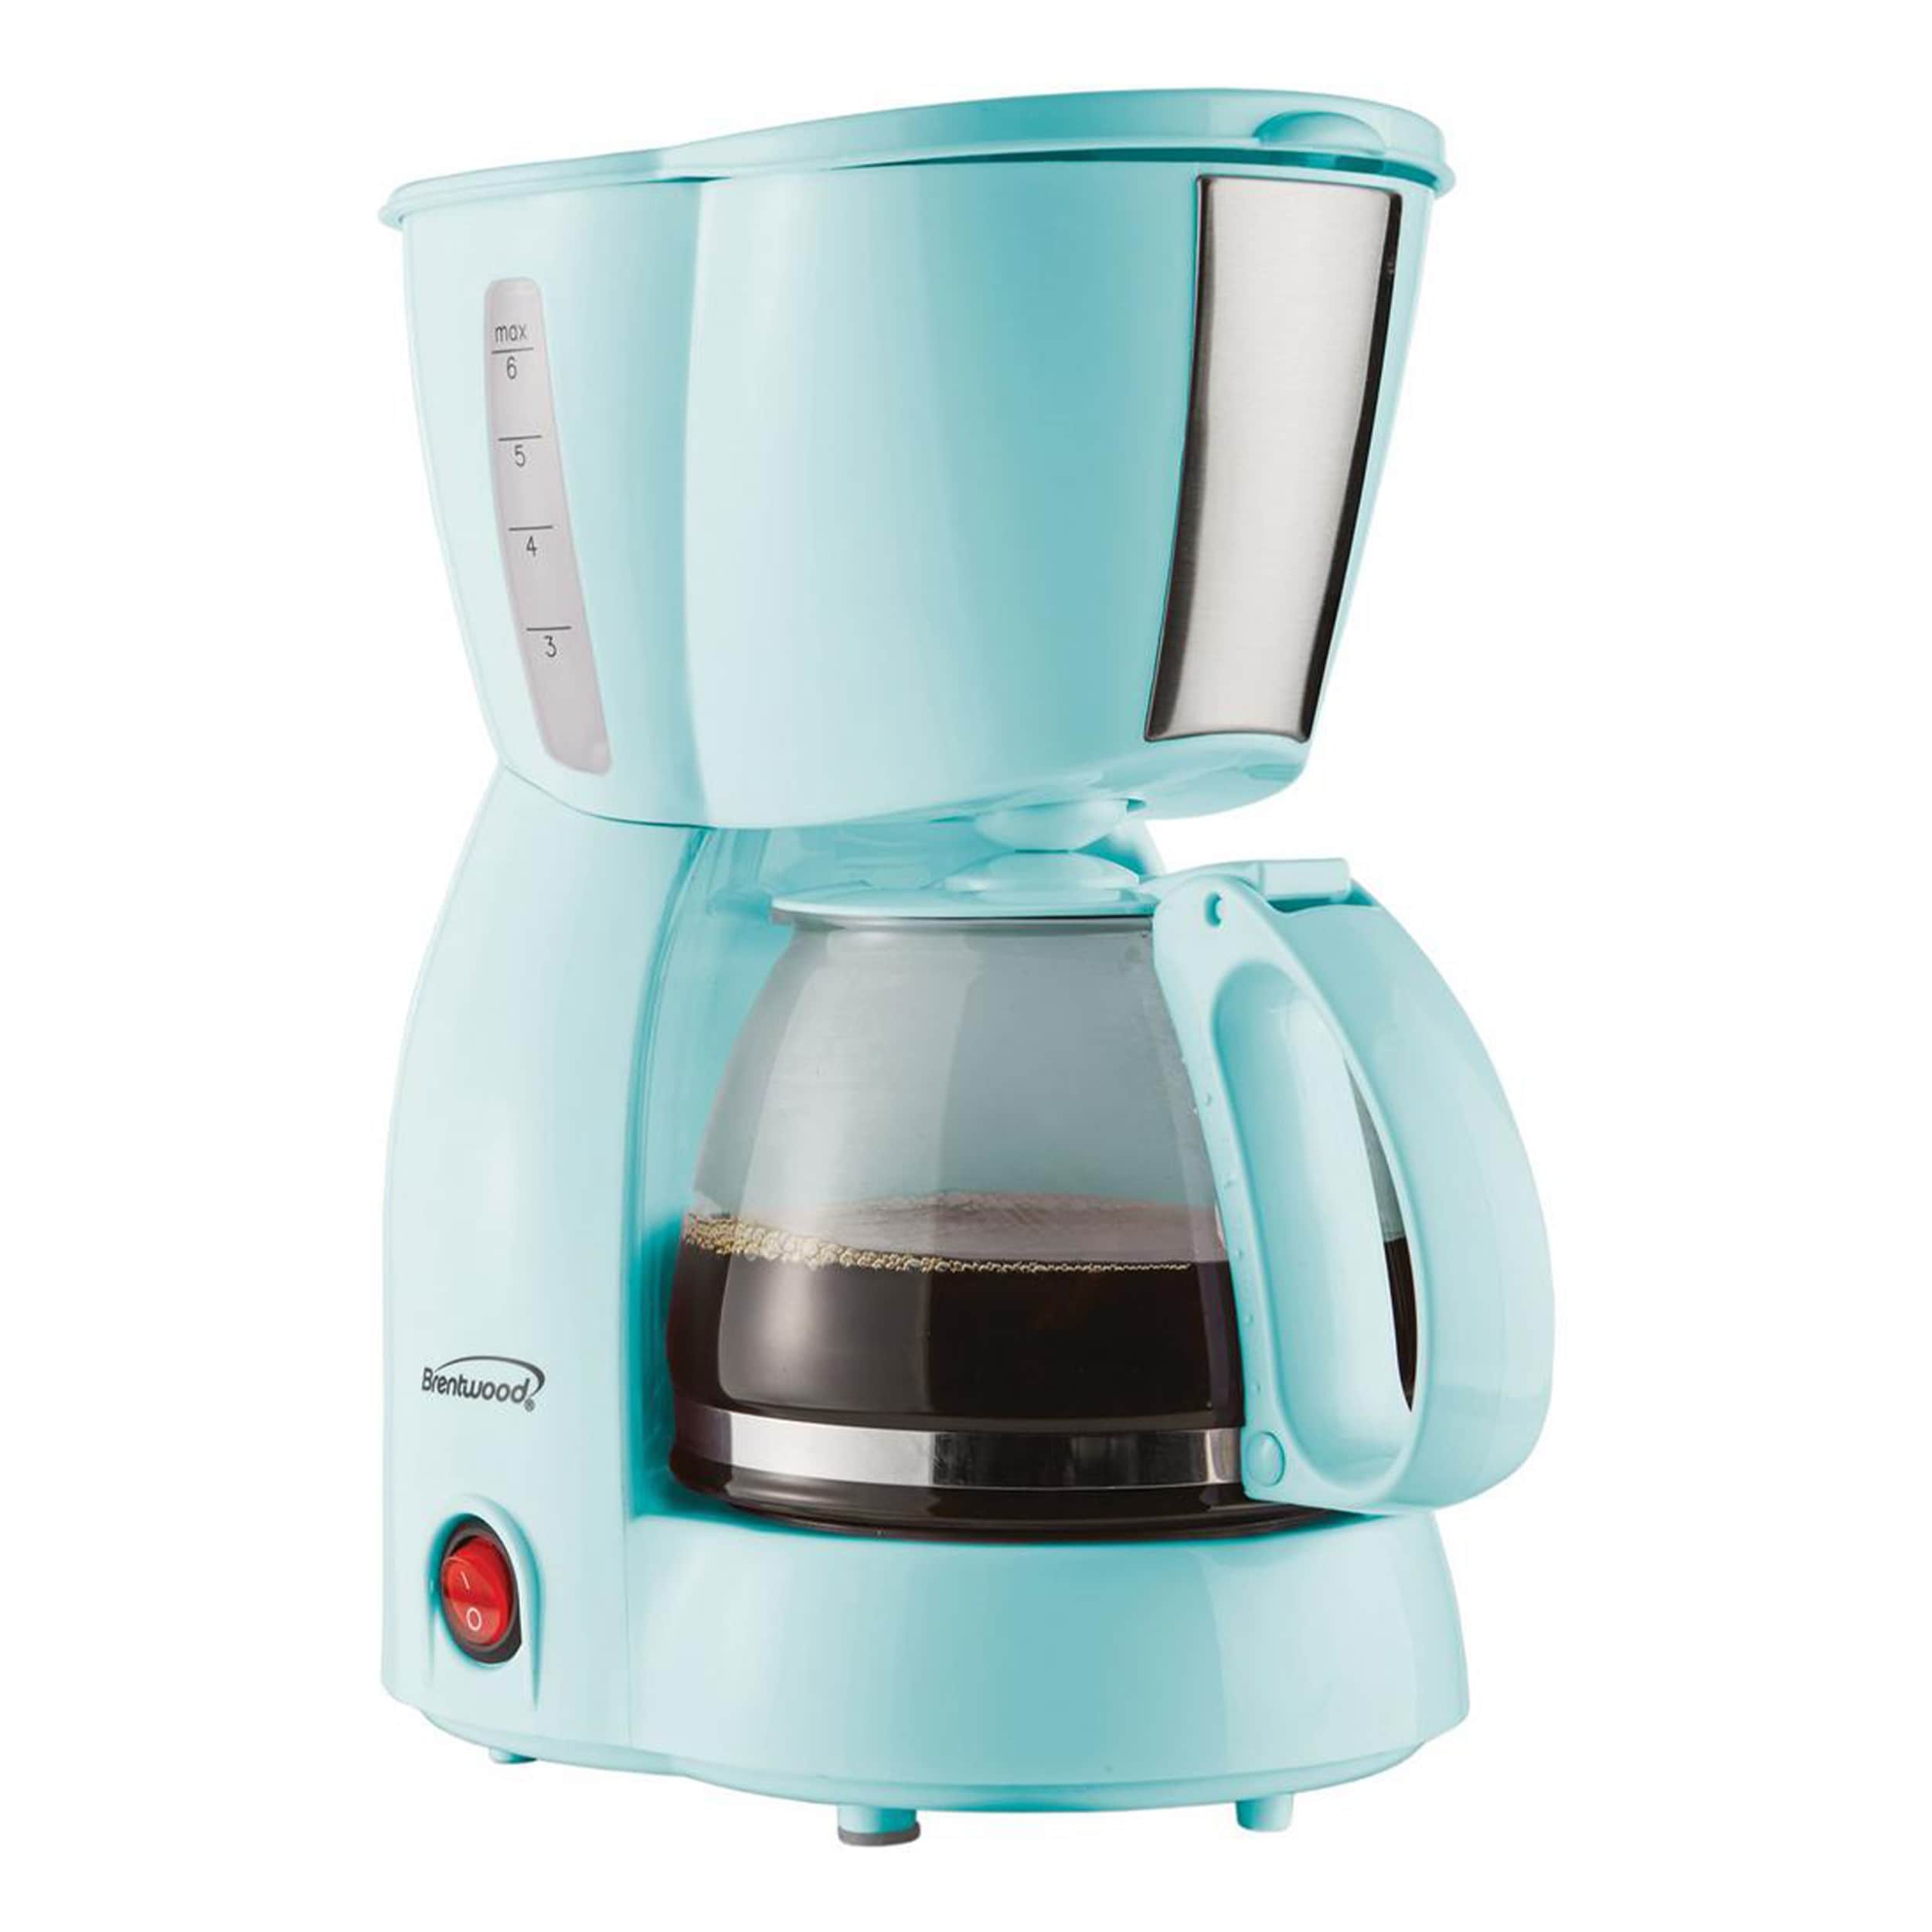 https://ak1.ostkcdn.com/images/products/is/images/direct/5704303e27642d43a9deab992ede743e7c4976ed/Brentwood-4-Cup-650-Watt-Coffee-Maker-in-Blue.jpg